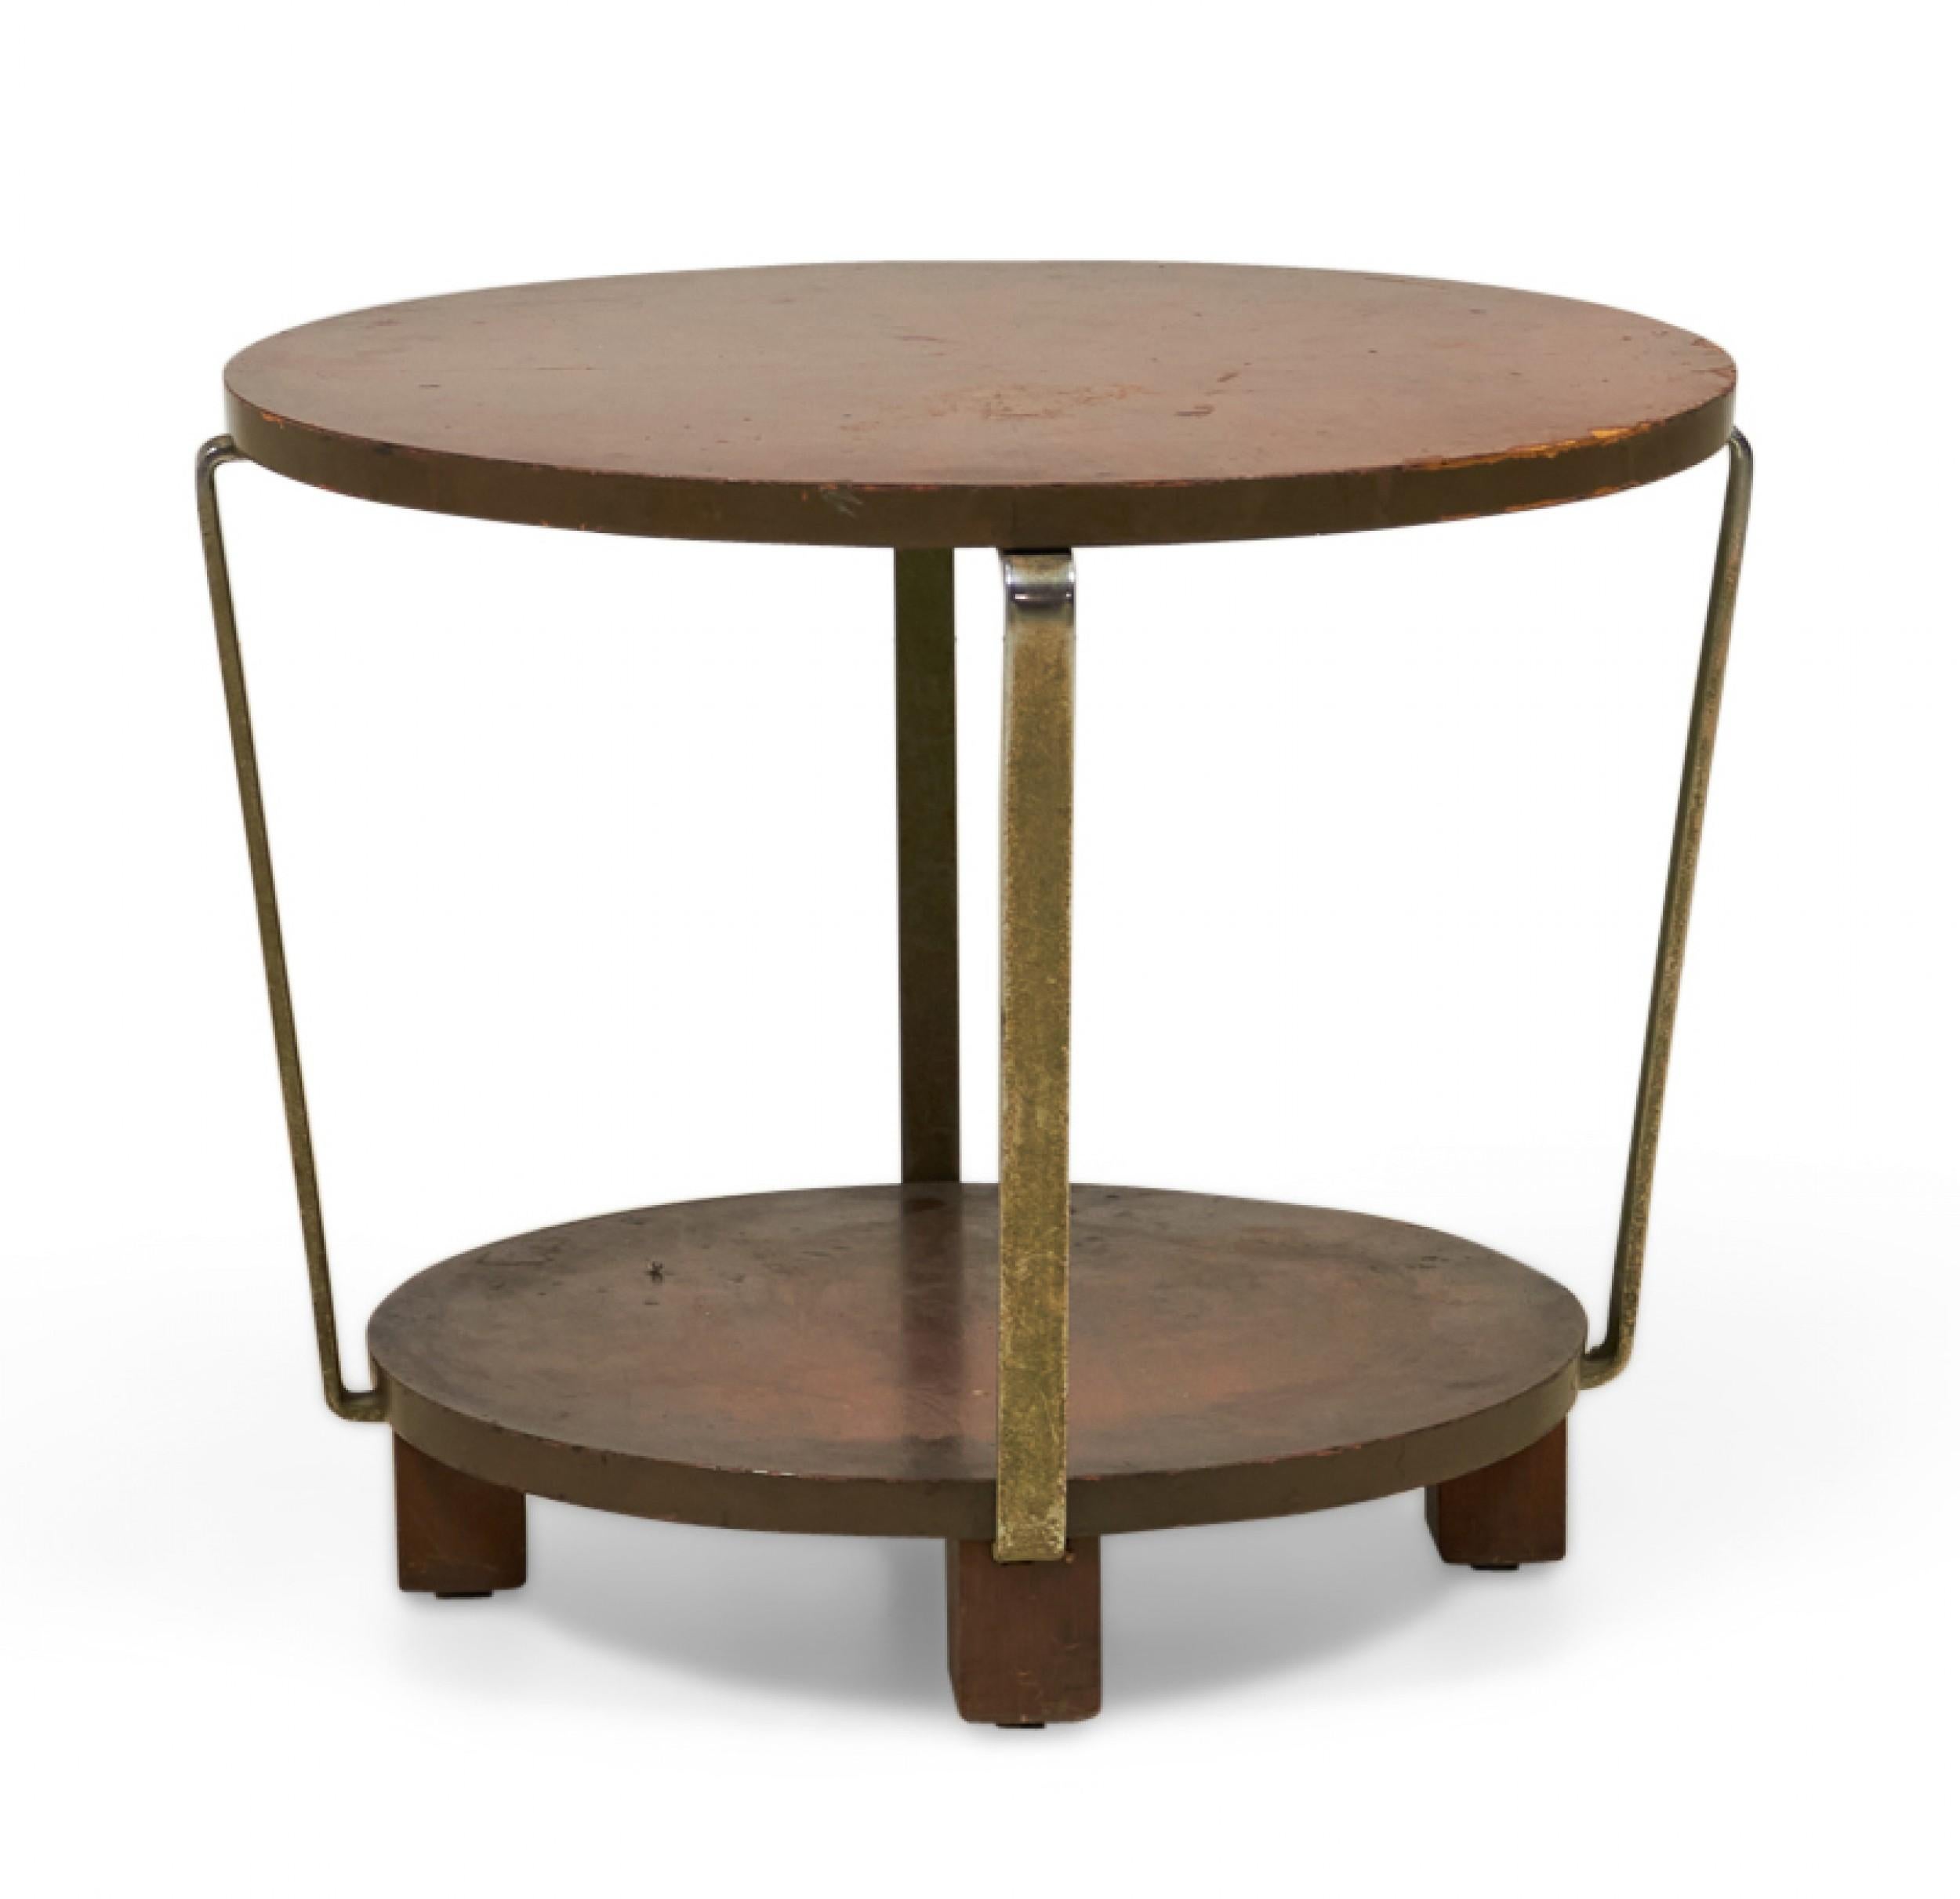 American Art Deco Circular Walnut and Brass Occasional / Side Table